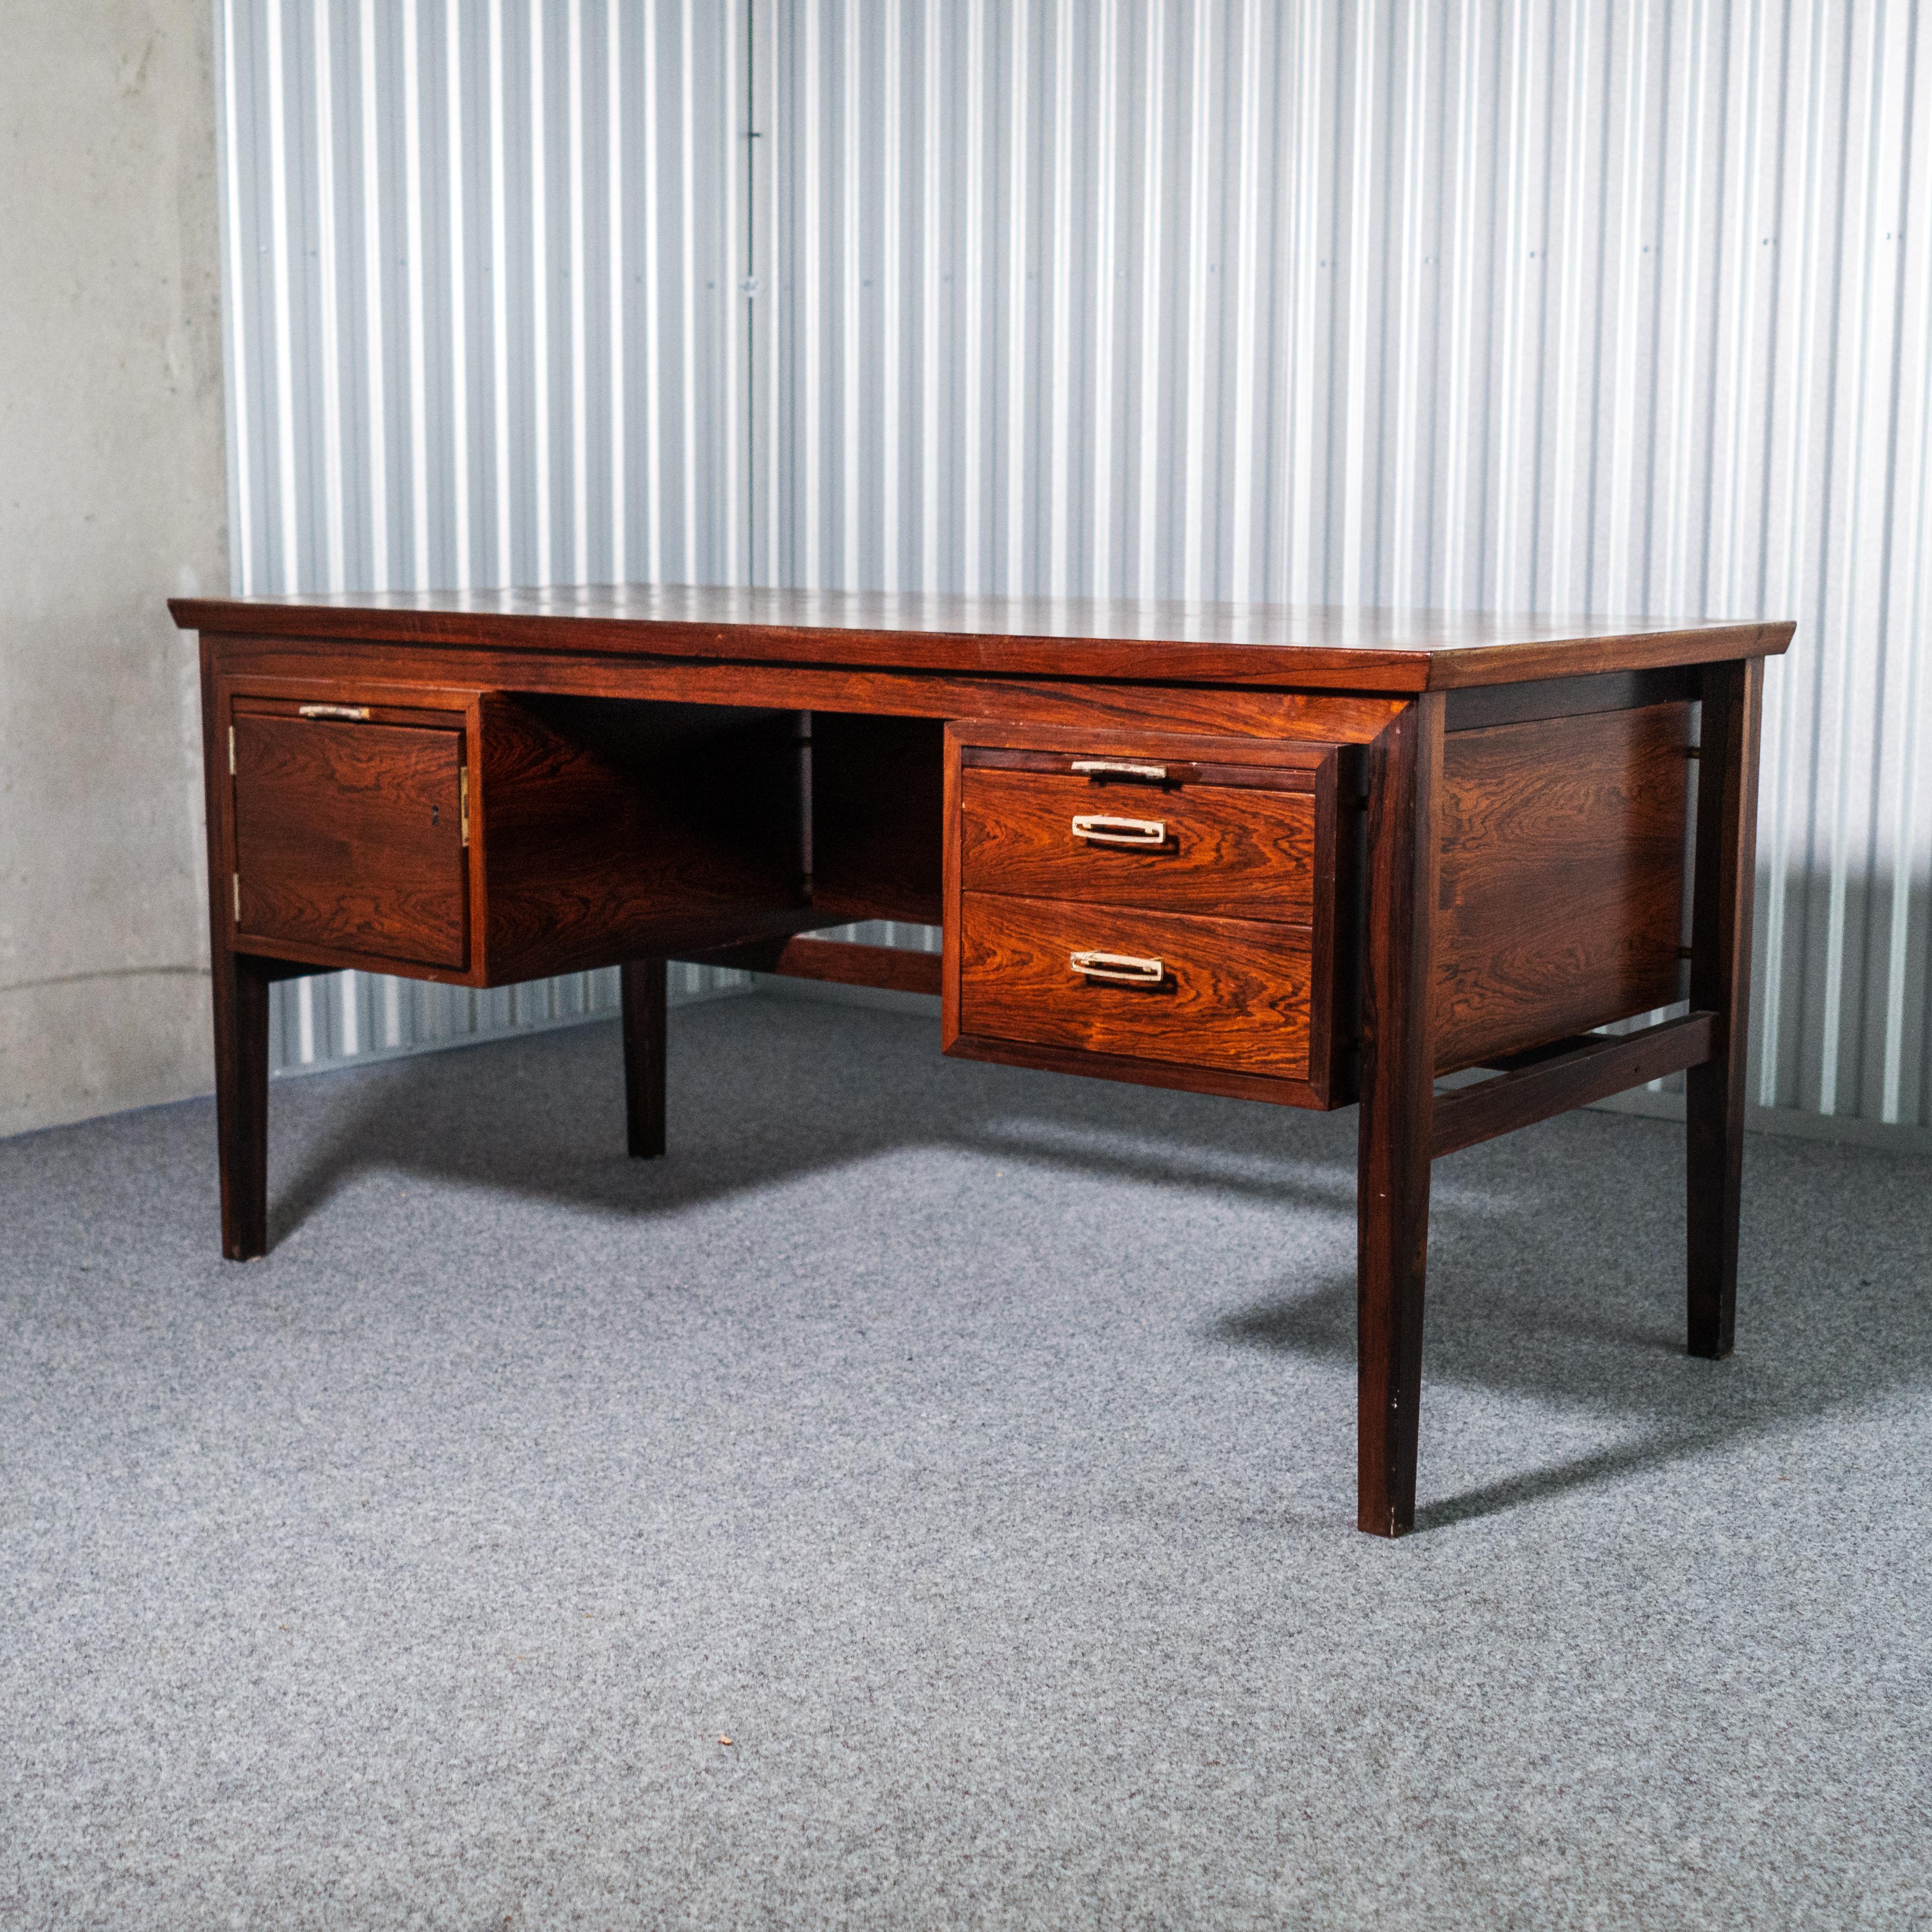 Beautiful midcentury writing table. The style is very inspired of Arne Vodder.
Perfect for use in the office or in the home.